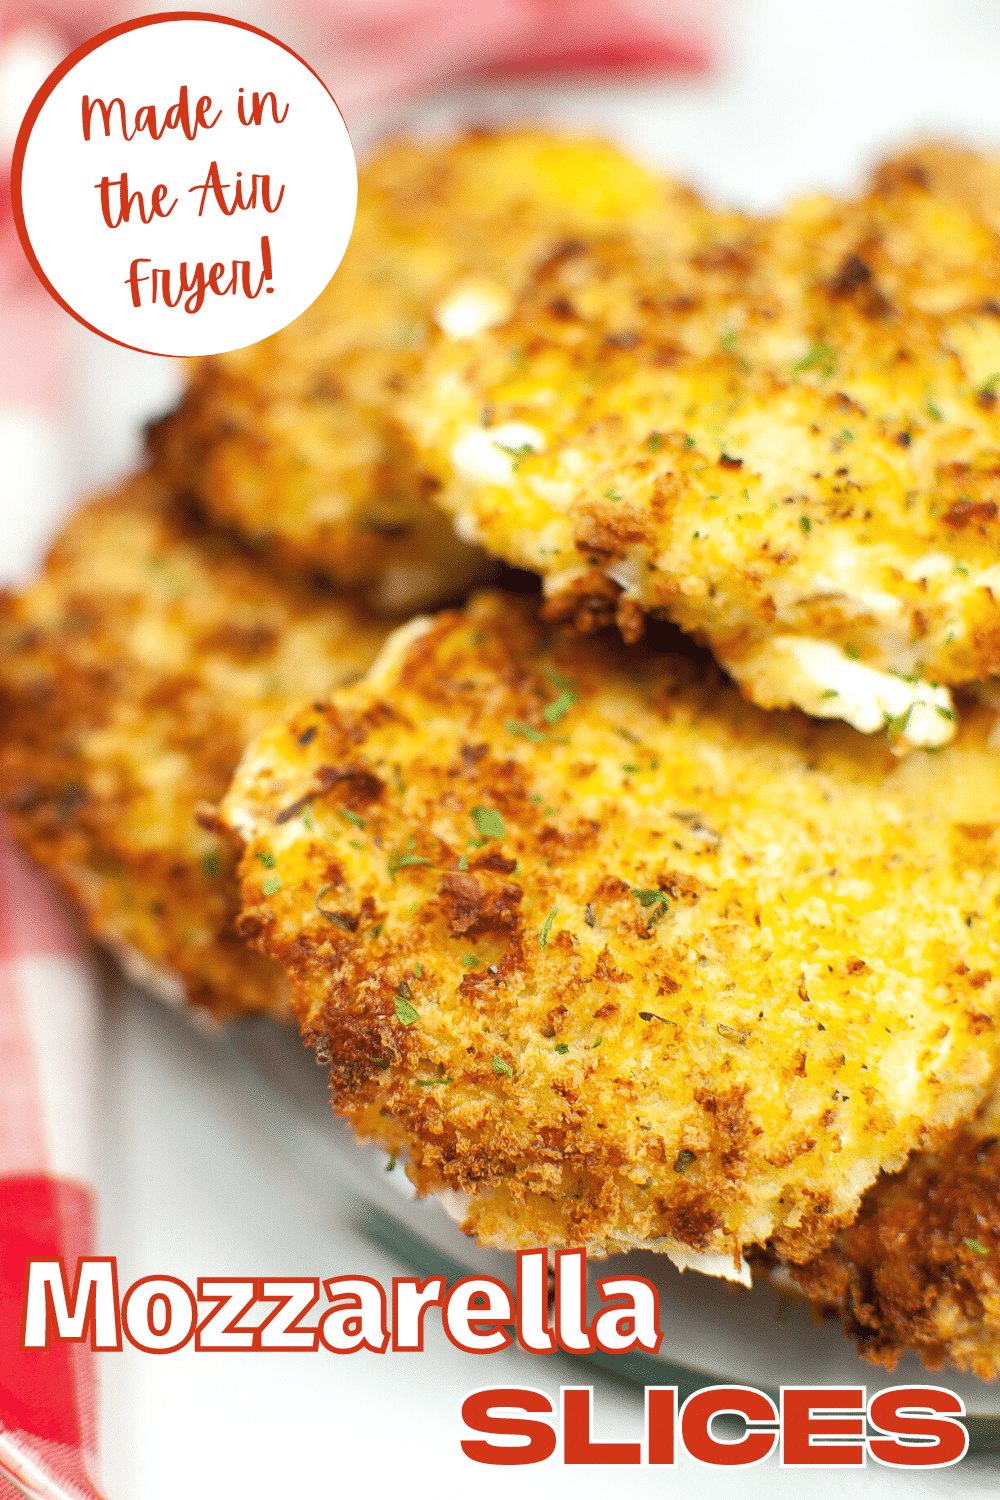 These Air Fryer Mozzarella Slices are the perfect snack or appetizer! They are crispy on the outside and melty on the inside. #airfryer #airfryermozzarella #mozzarellaslices #mozzarella #appetizer via @wondermomwannab